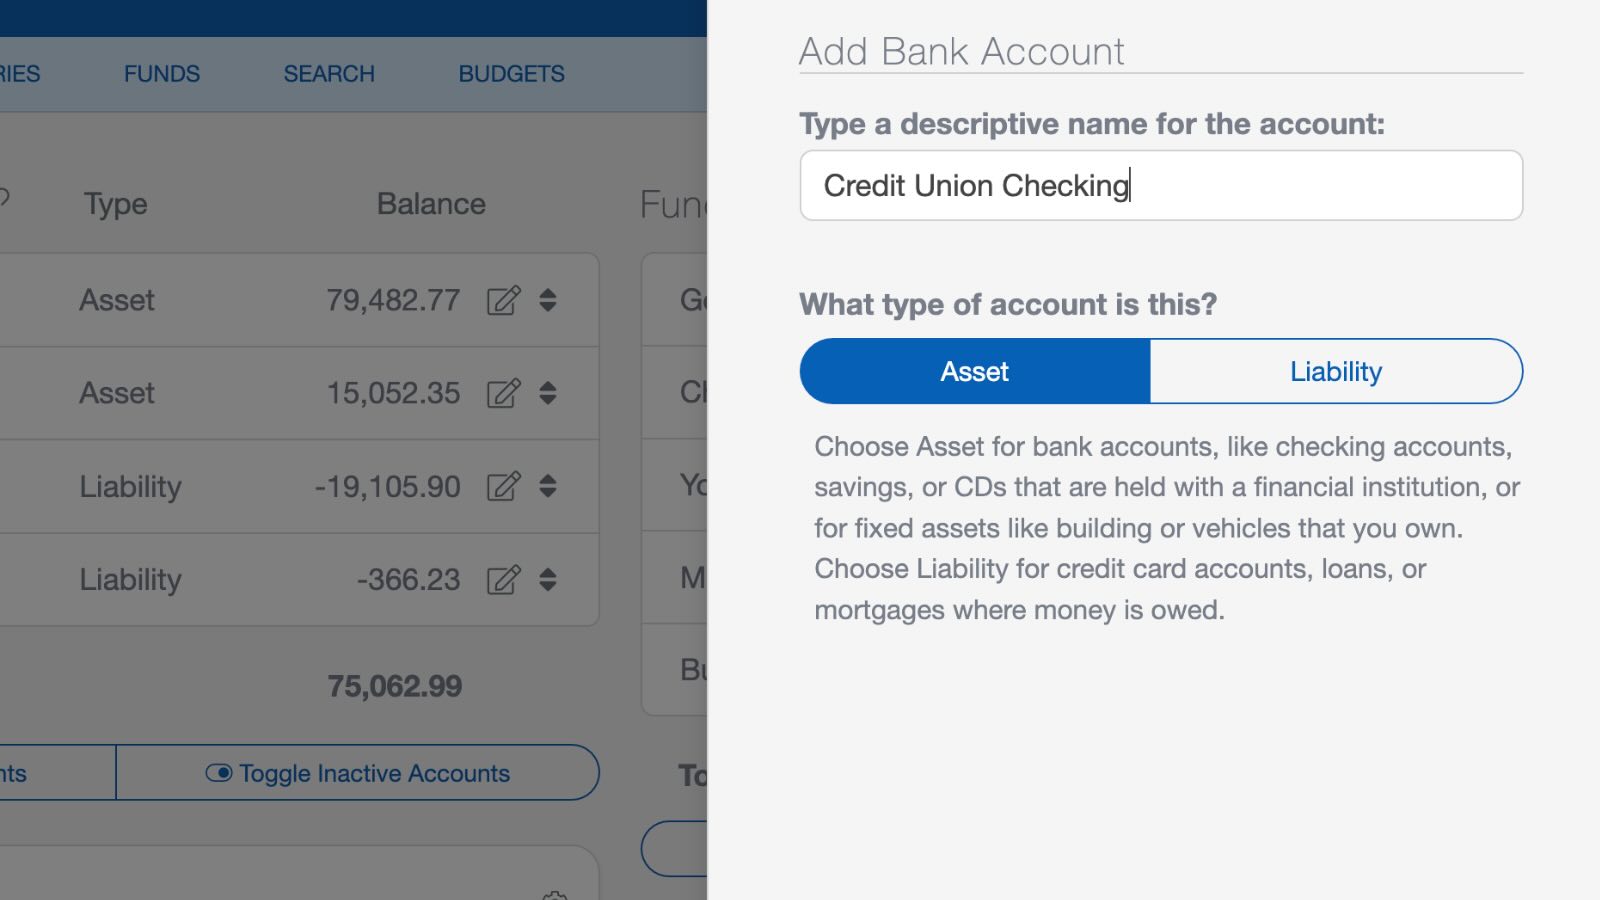 Name a church bank account for the church accounting feature in ChurchTrac